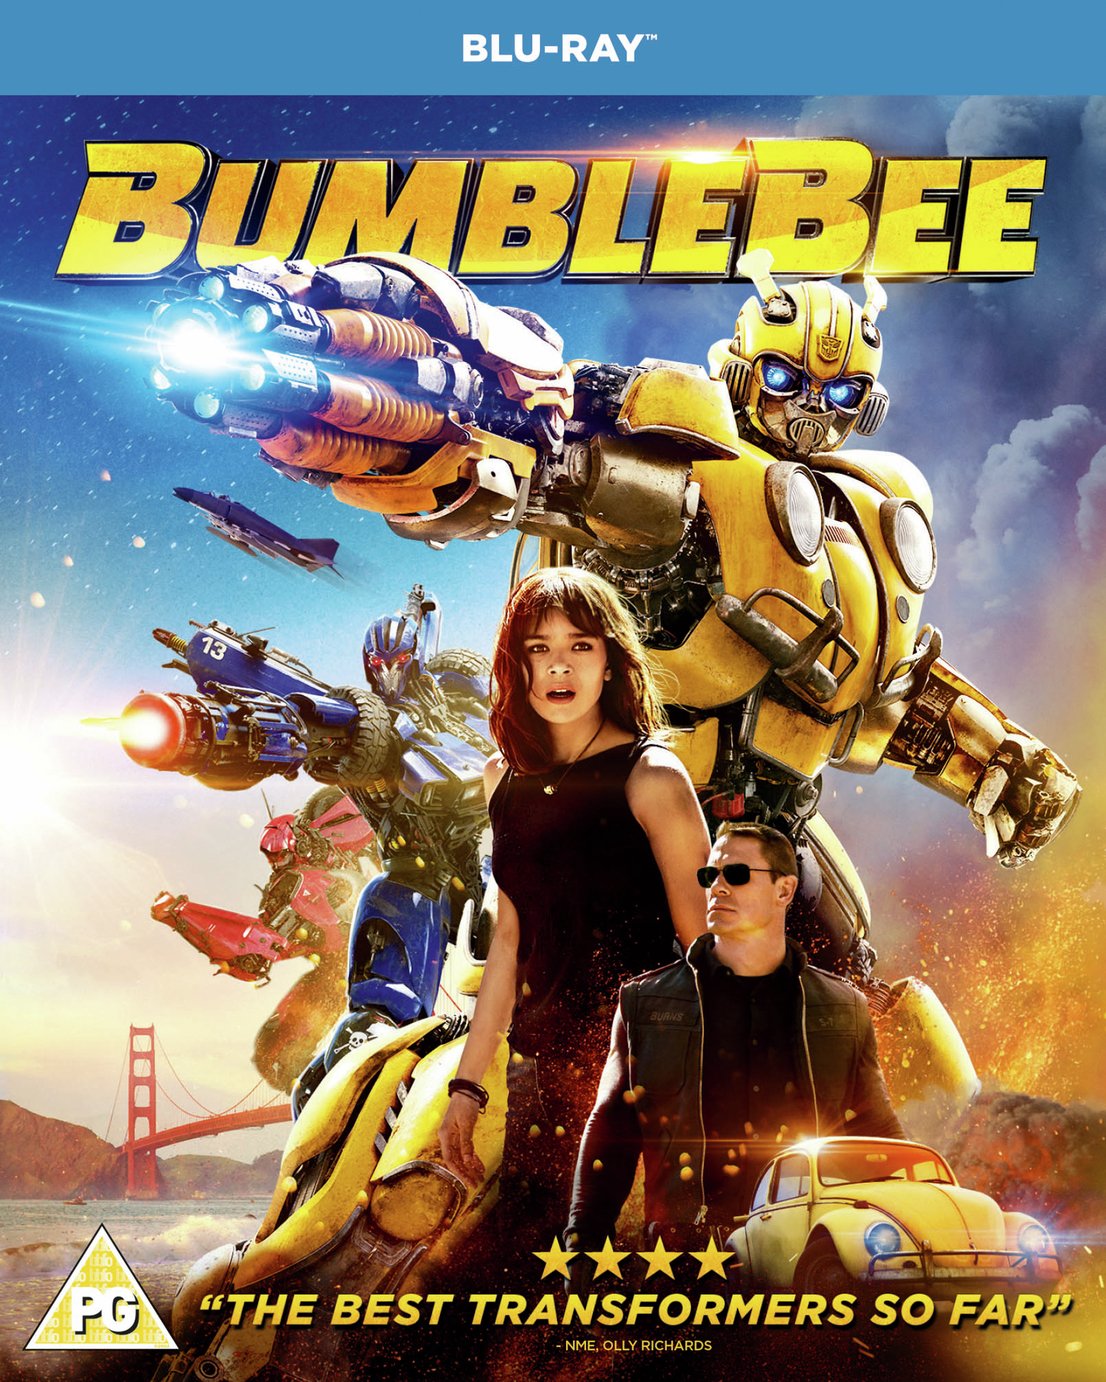 Bumblebee Blu-Ray Review